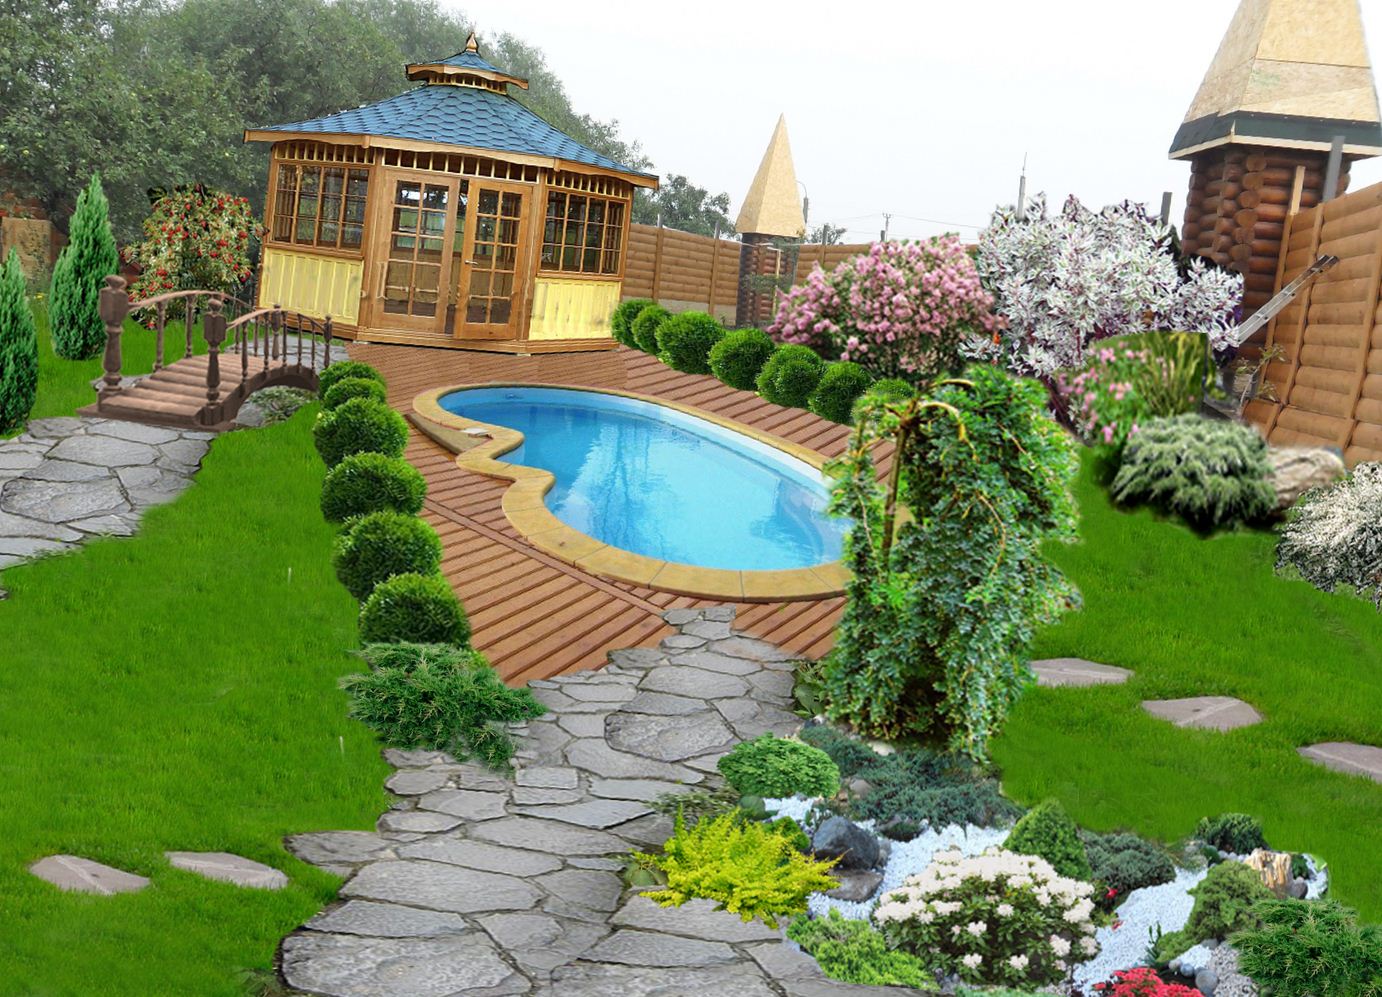 An example of a beautiful landscape design